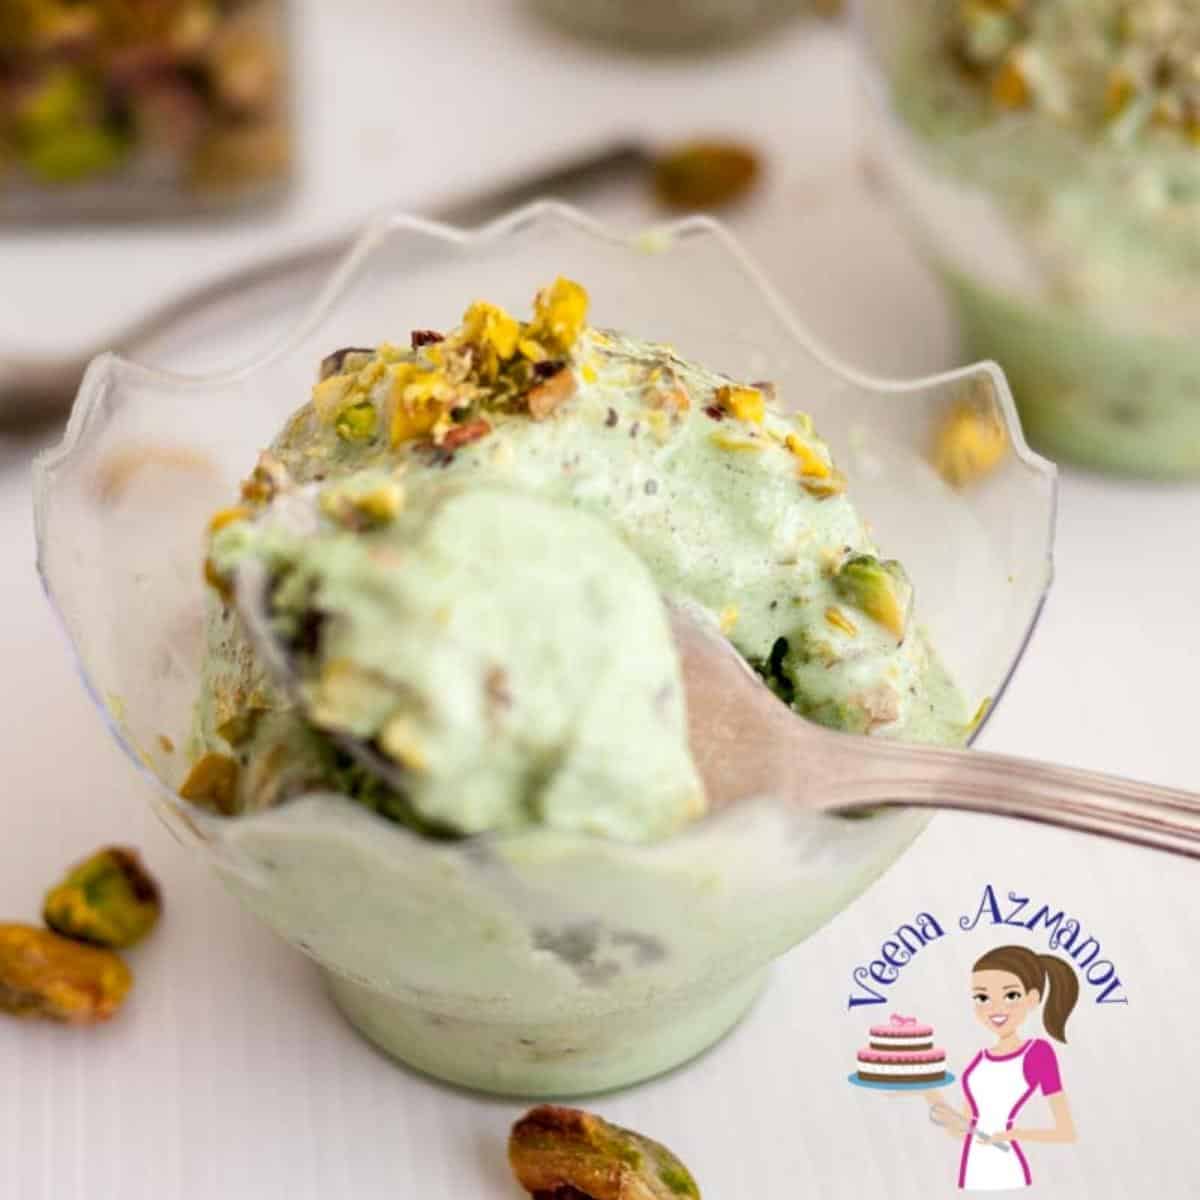 A bowl and spoon with matcha ice cream.